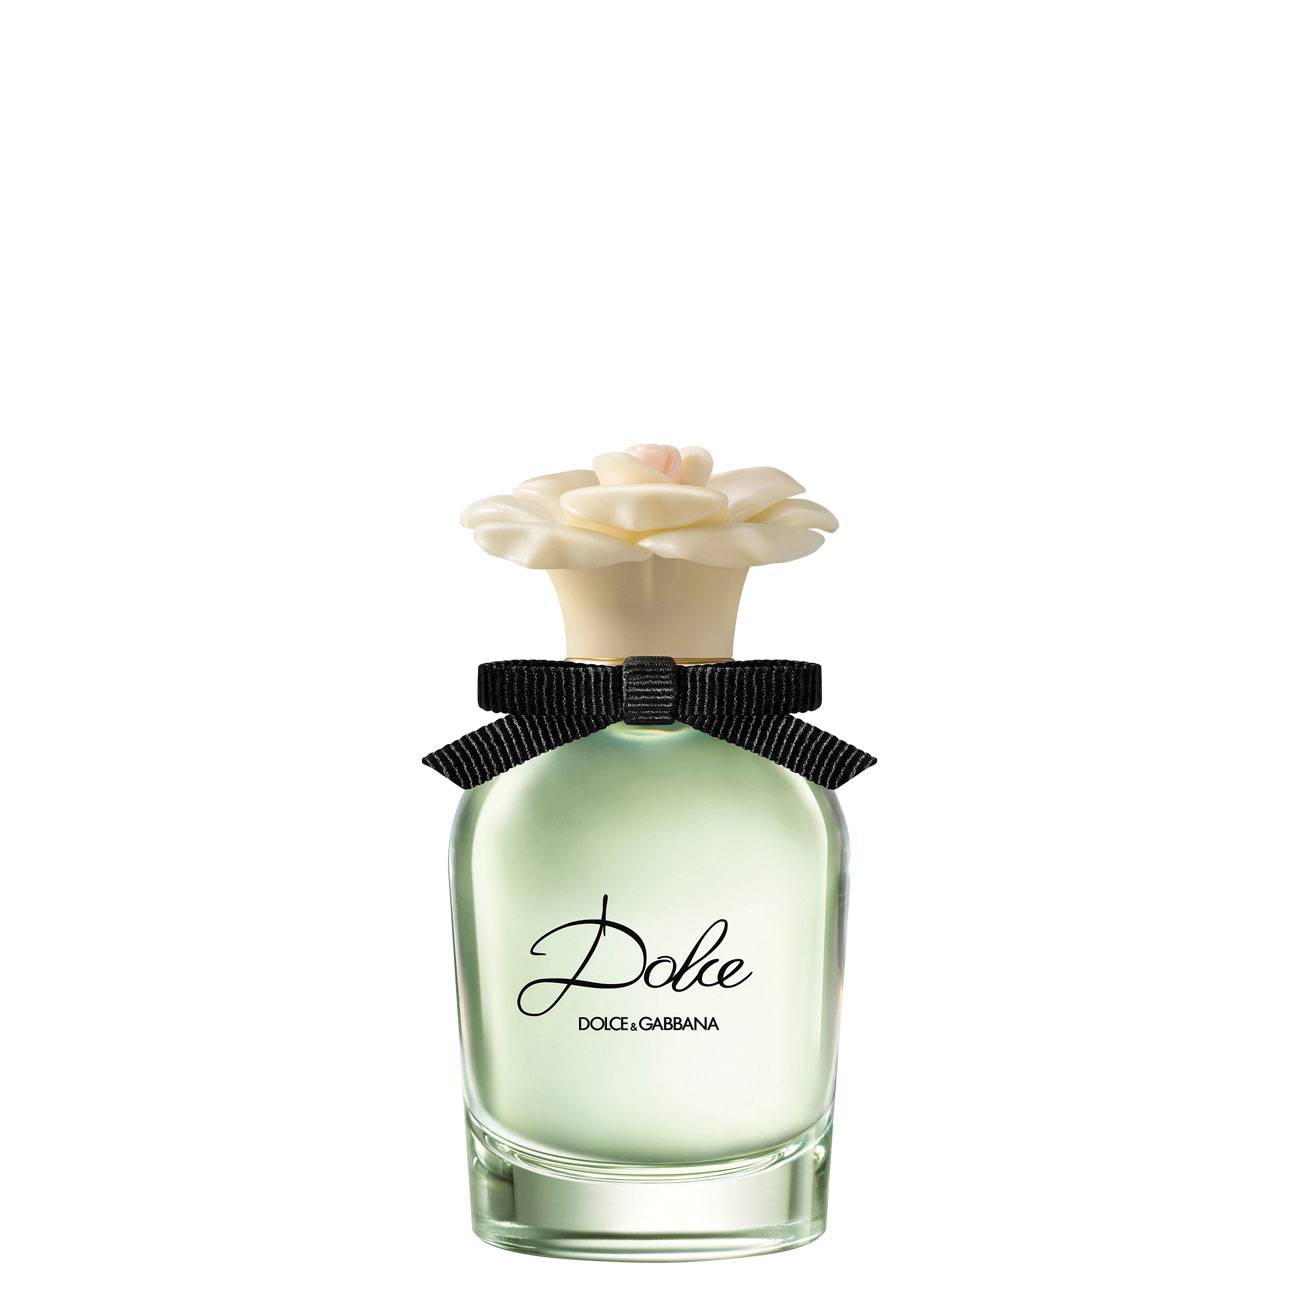 DOLCE 30ml